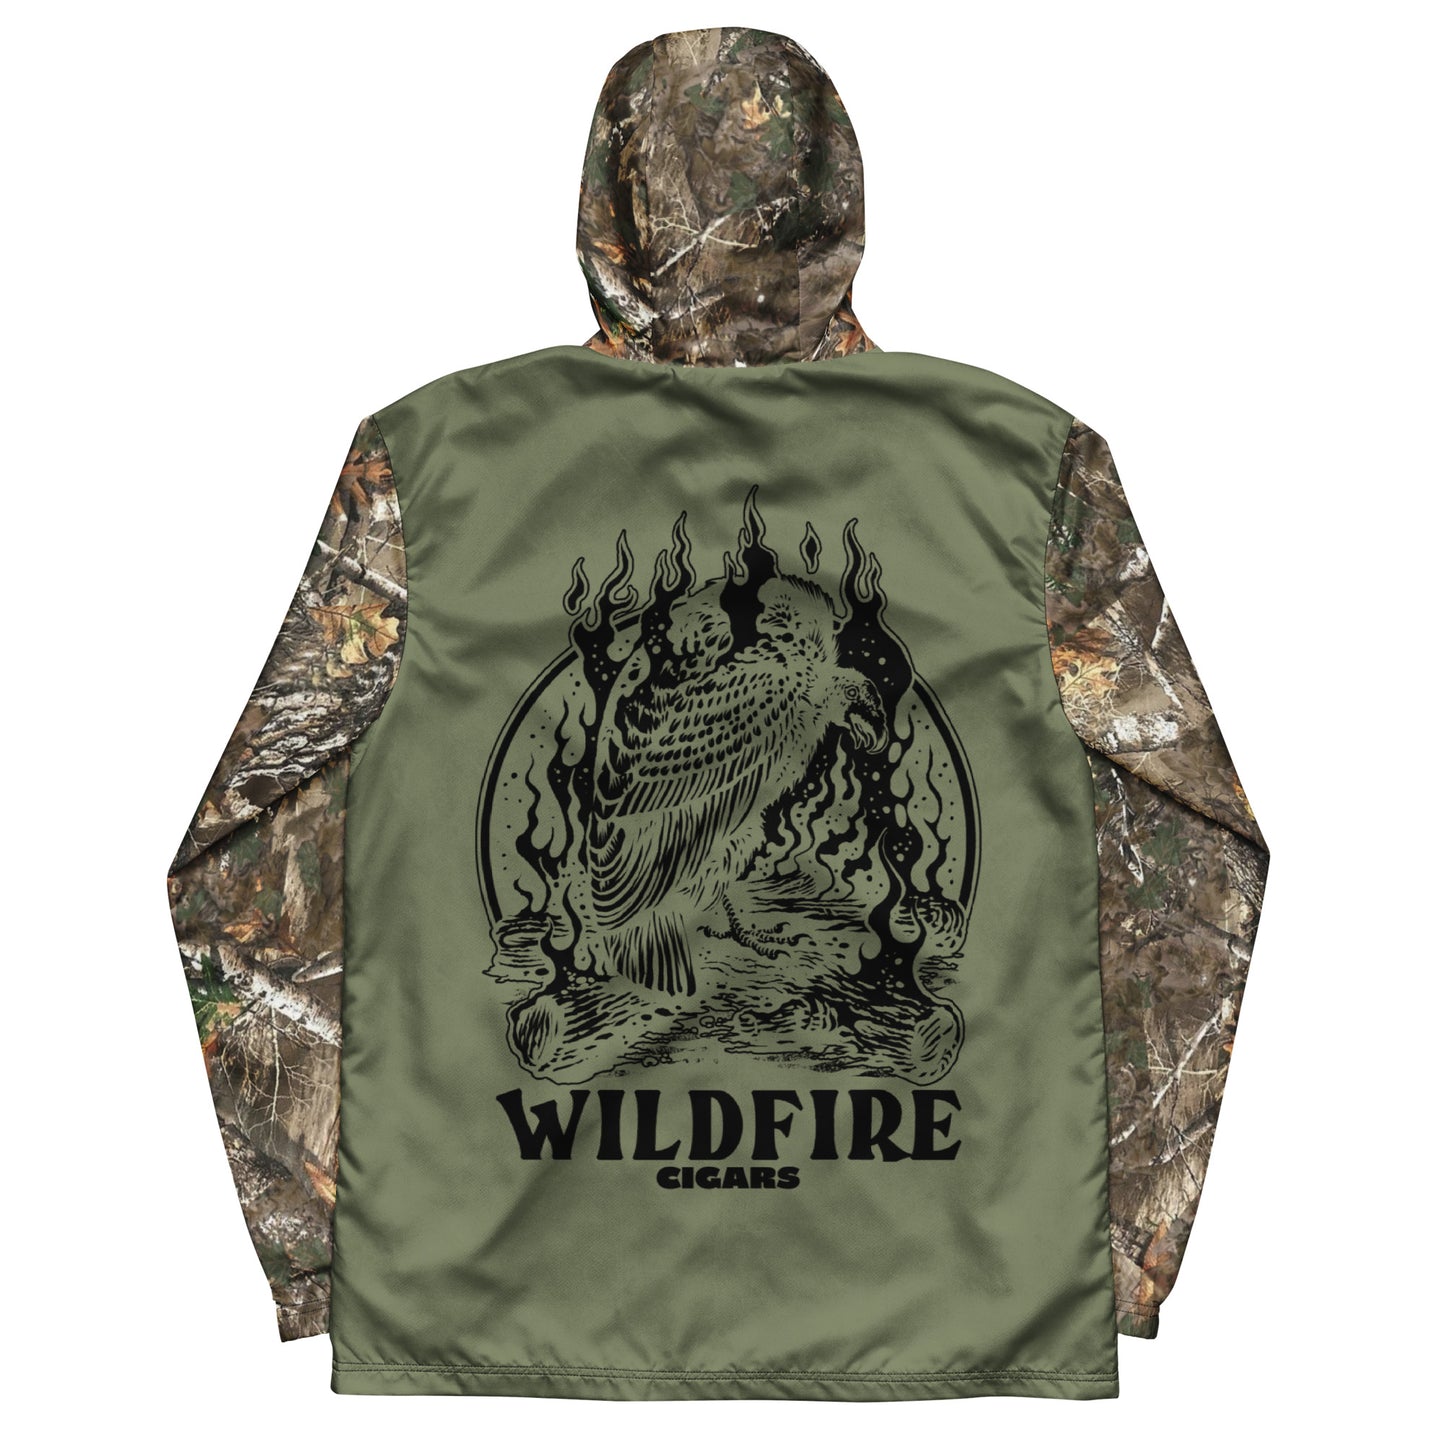 Wildfire Cigars Camouflage and green vulture windbreaker facing the back